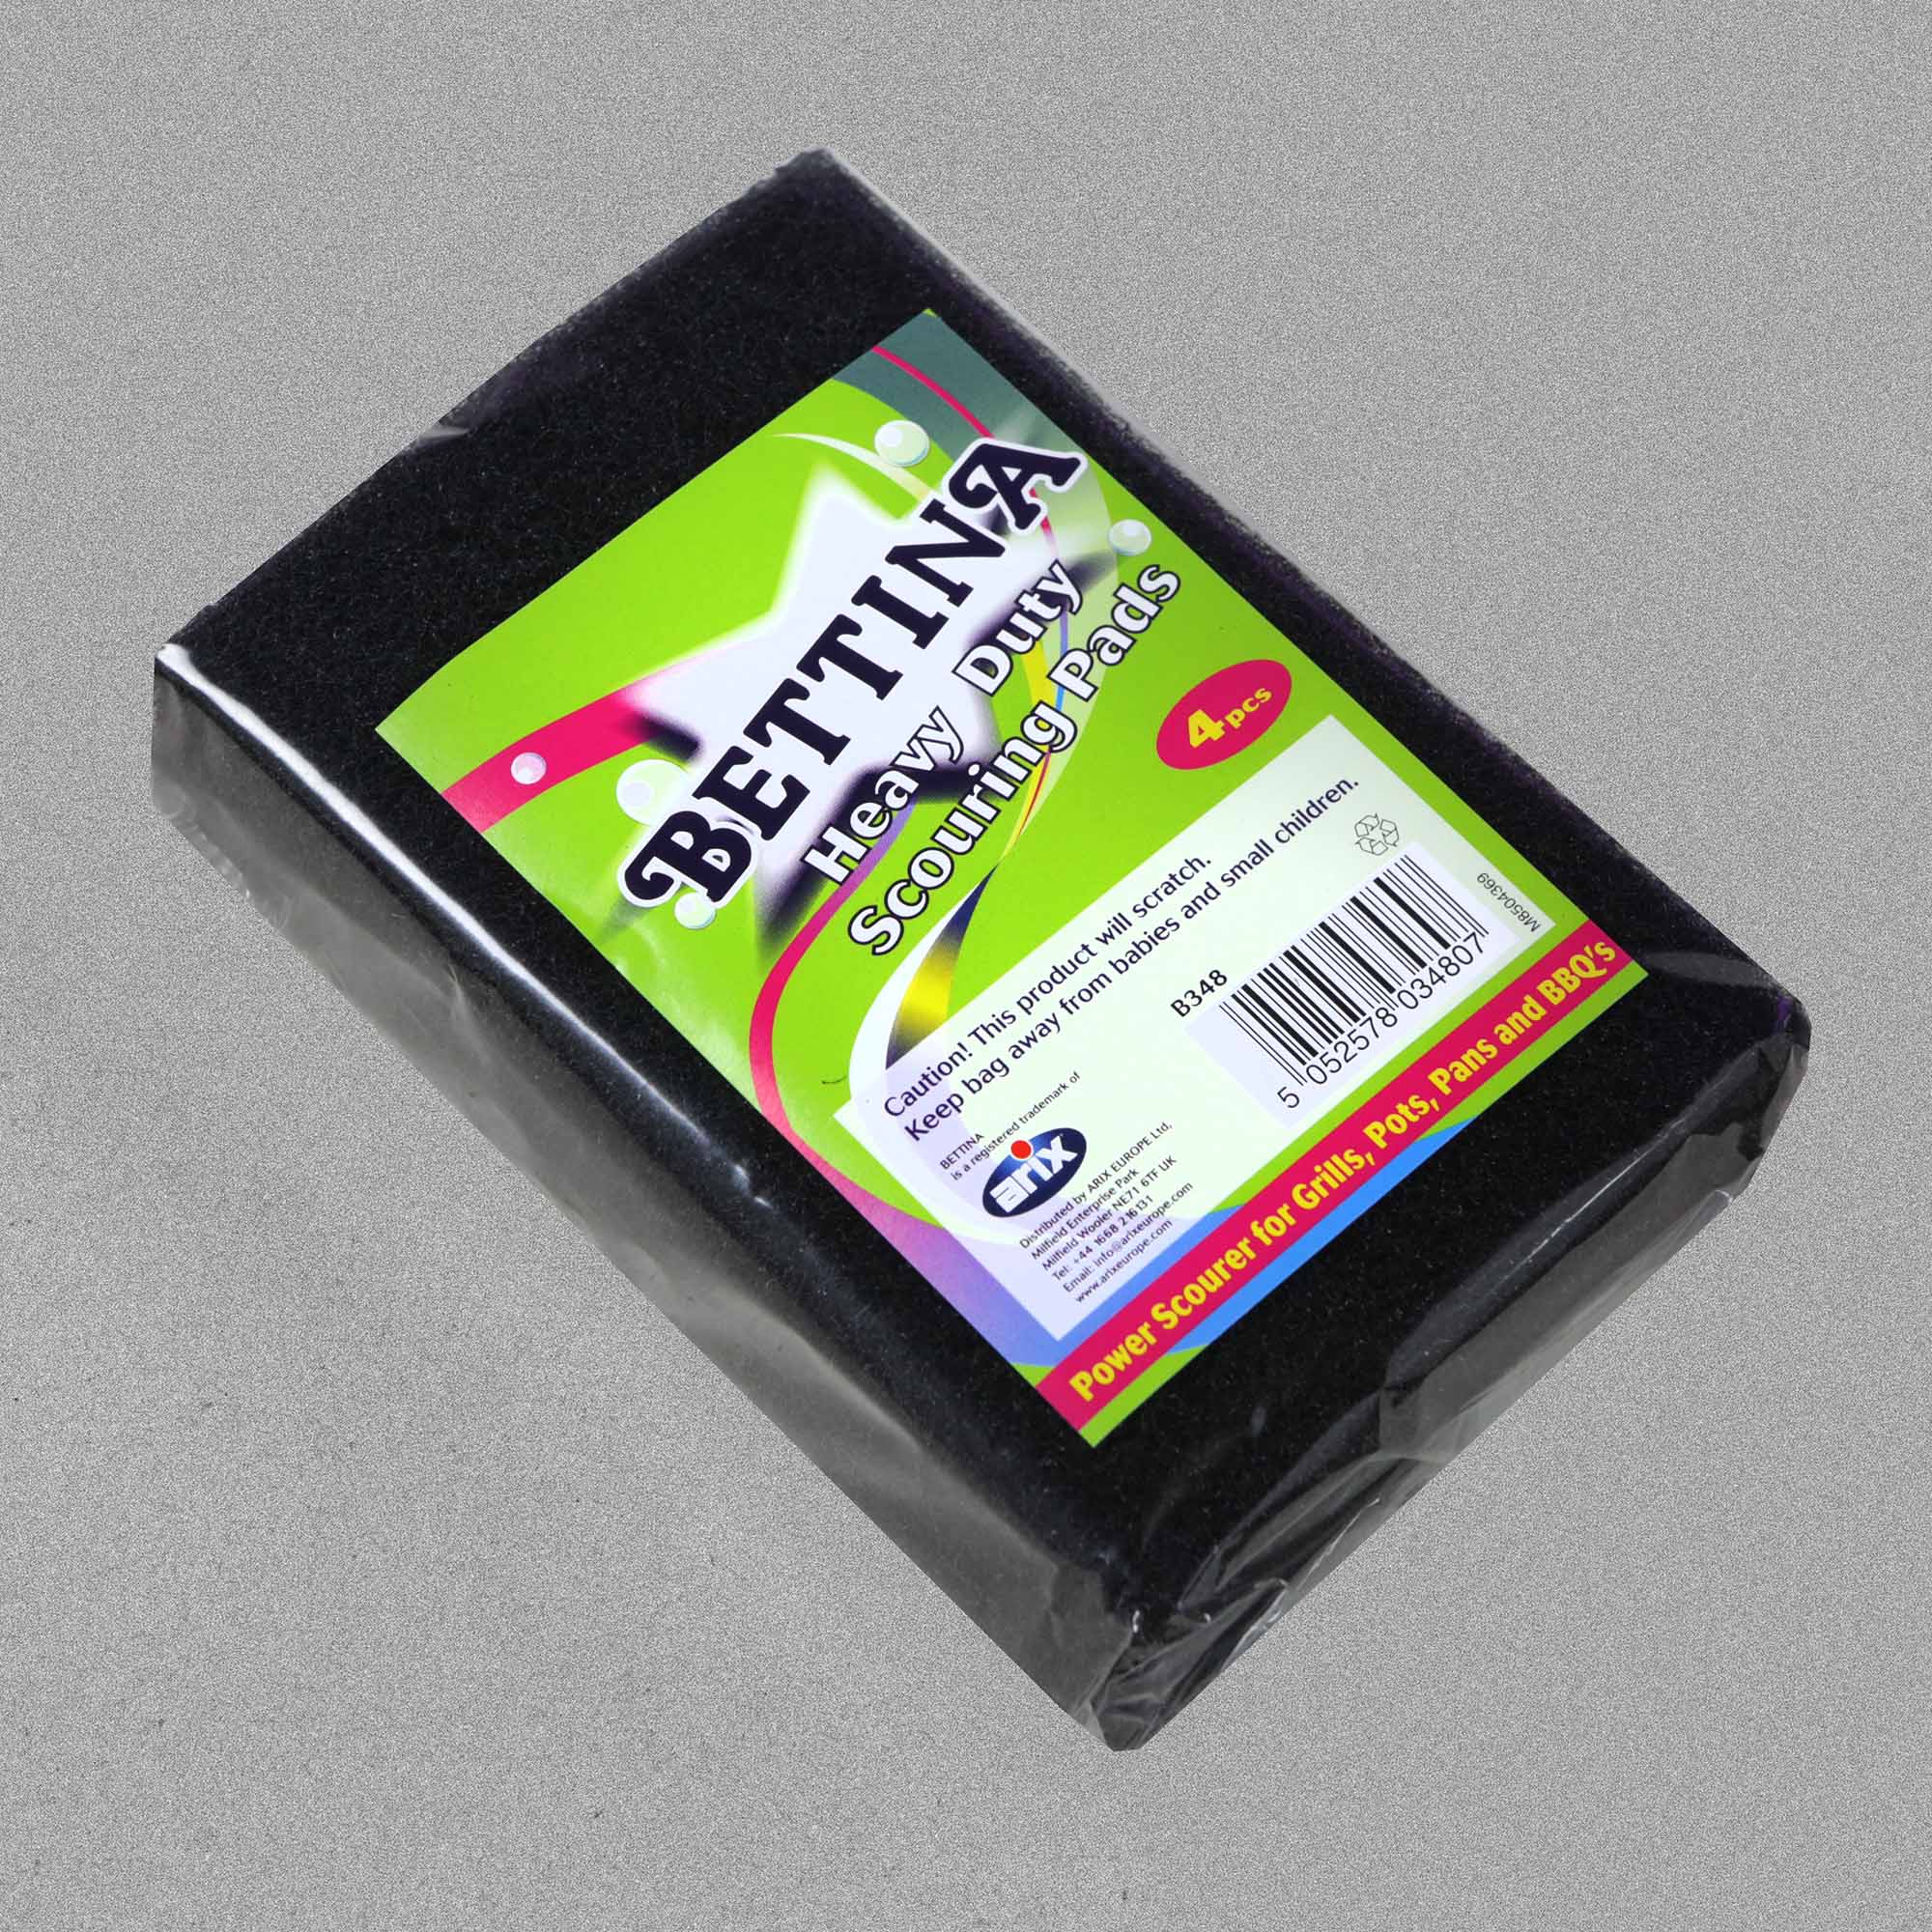 Heavy Duty Scouring Pads - Pack of 4 by Bettina, sold by In-Excess